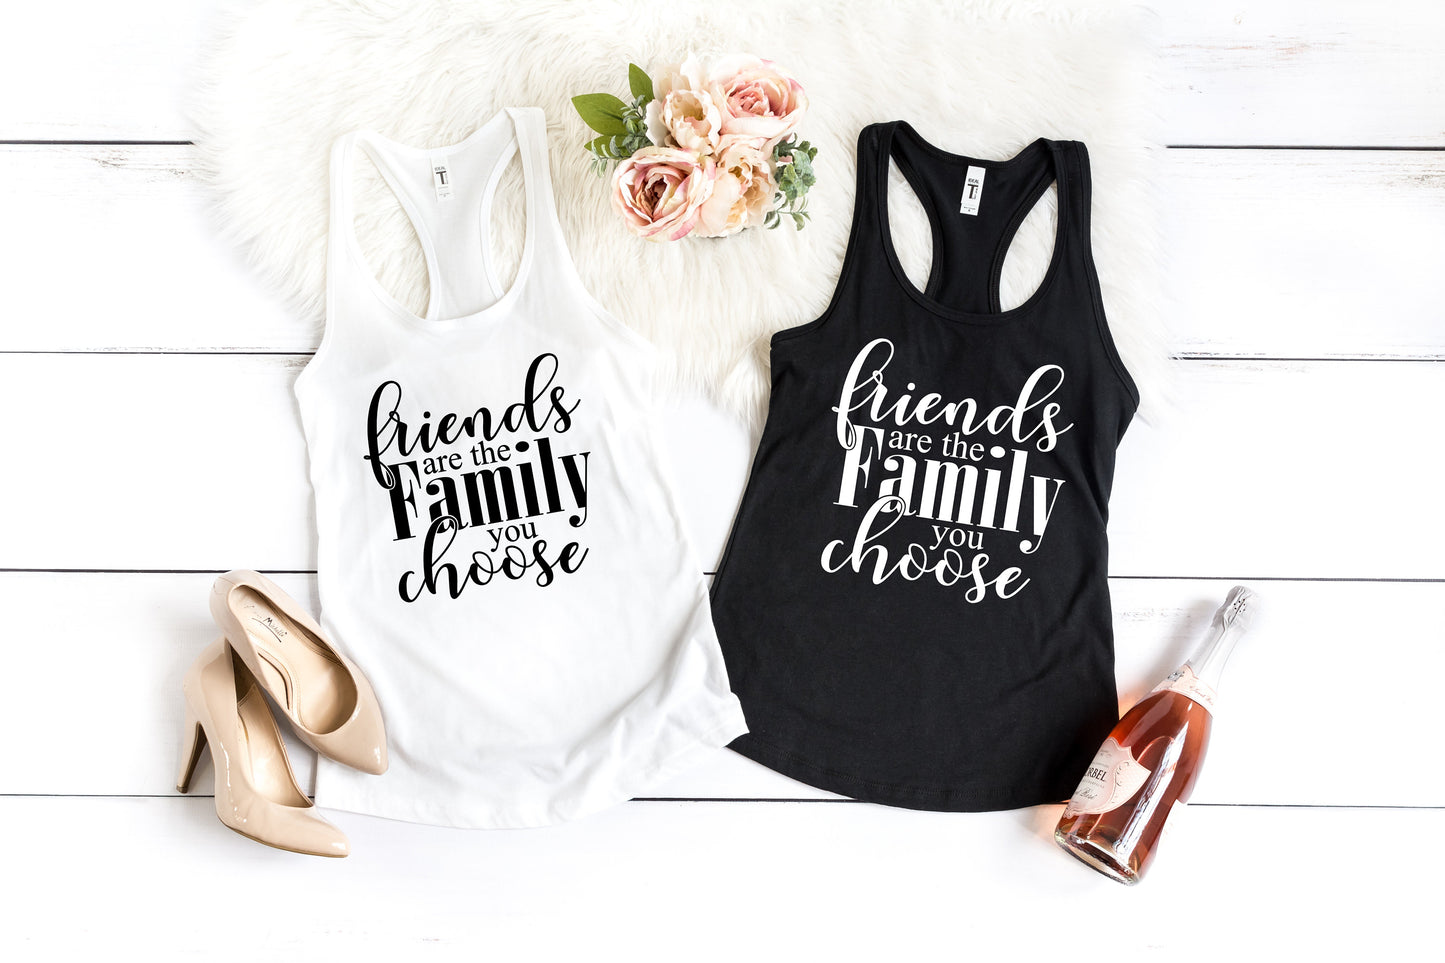 Friends are the Family You Choose Women's Tank Tops - Best Friend Matching Shirts - BFF Shirts - Bestie Tank Tops - Gift for Bestie